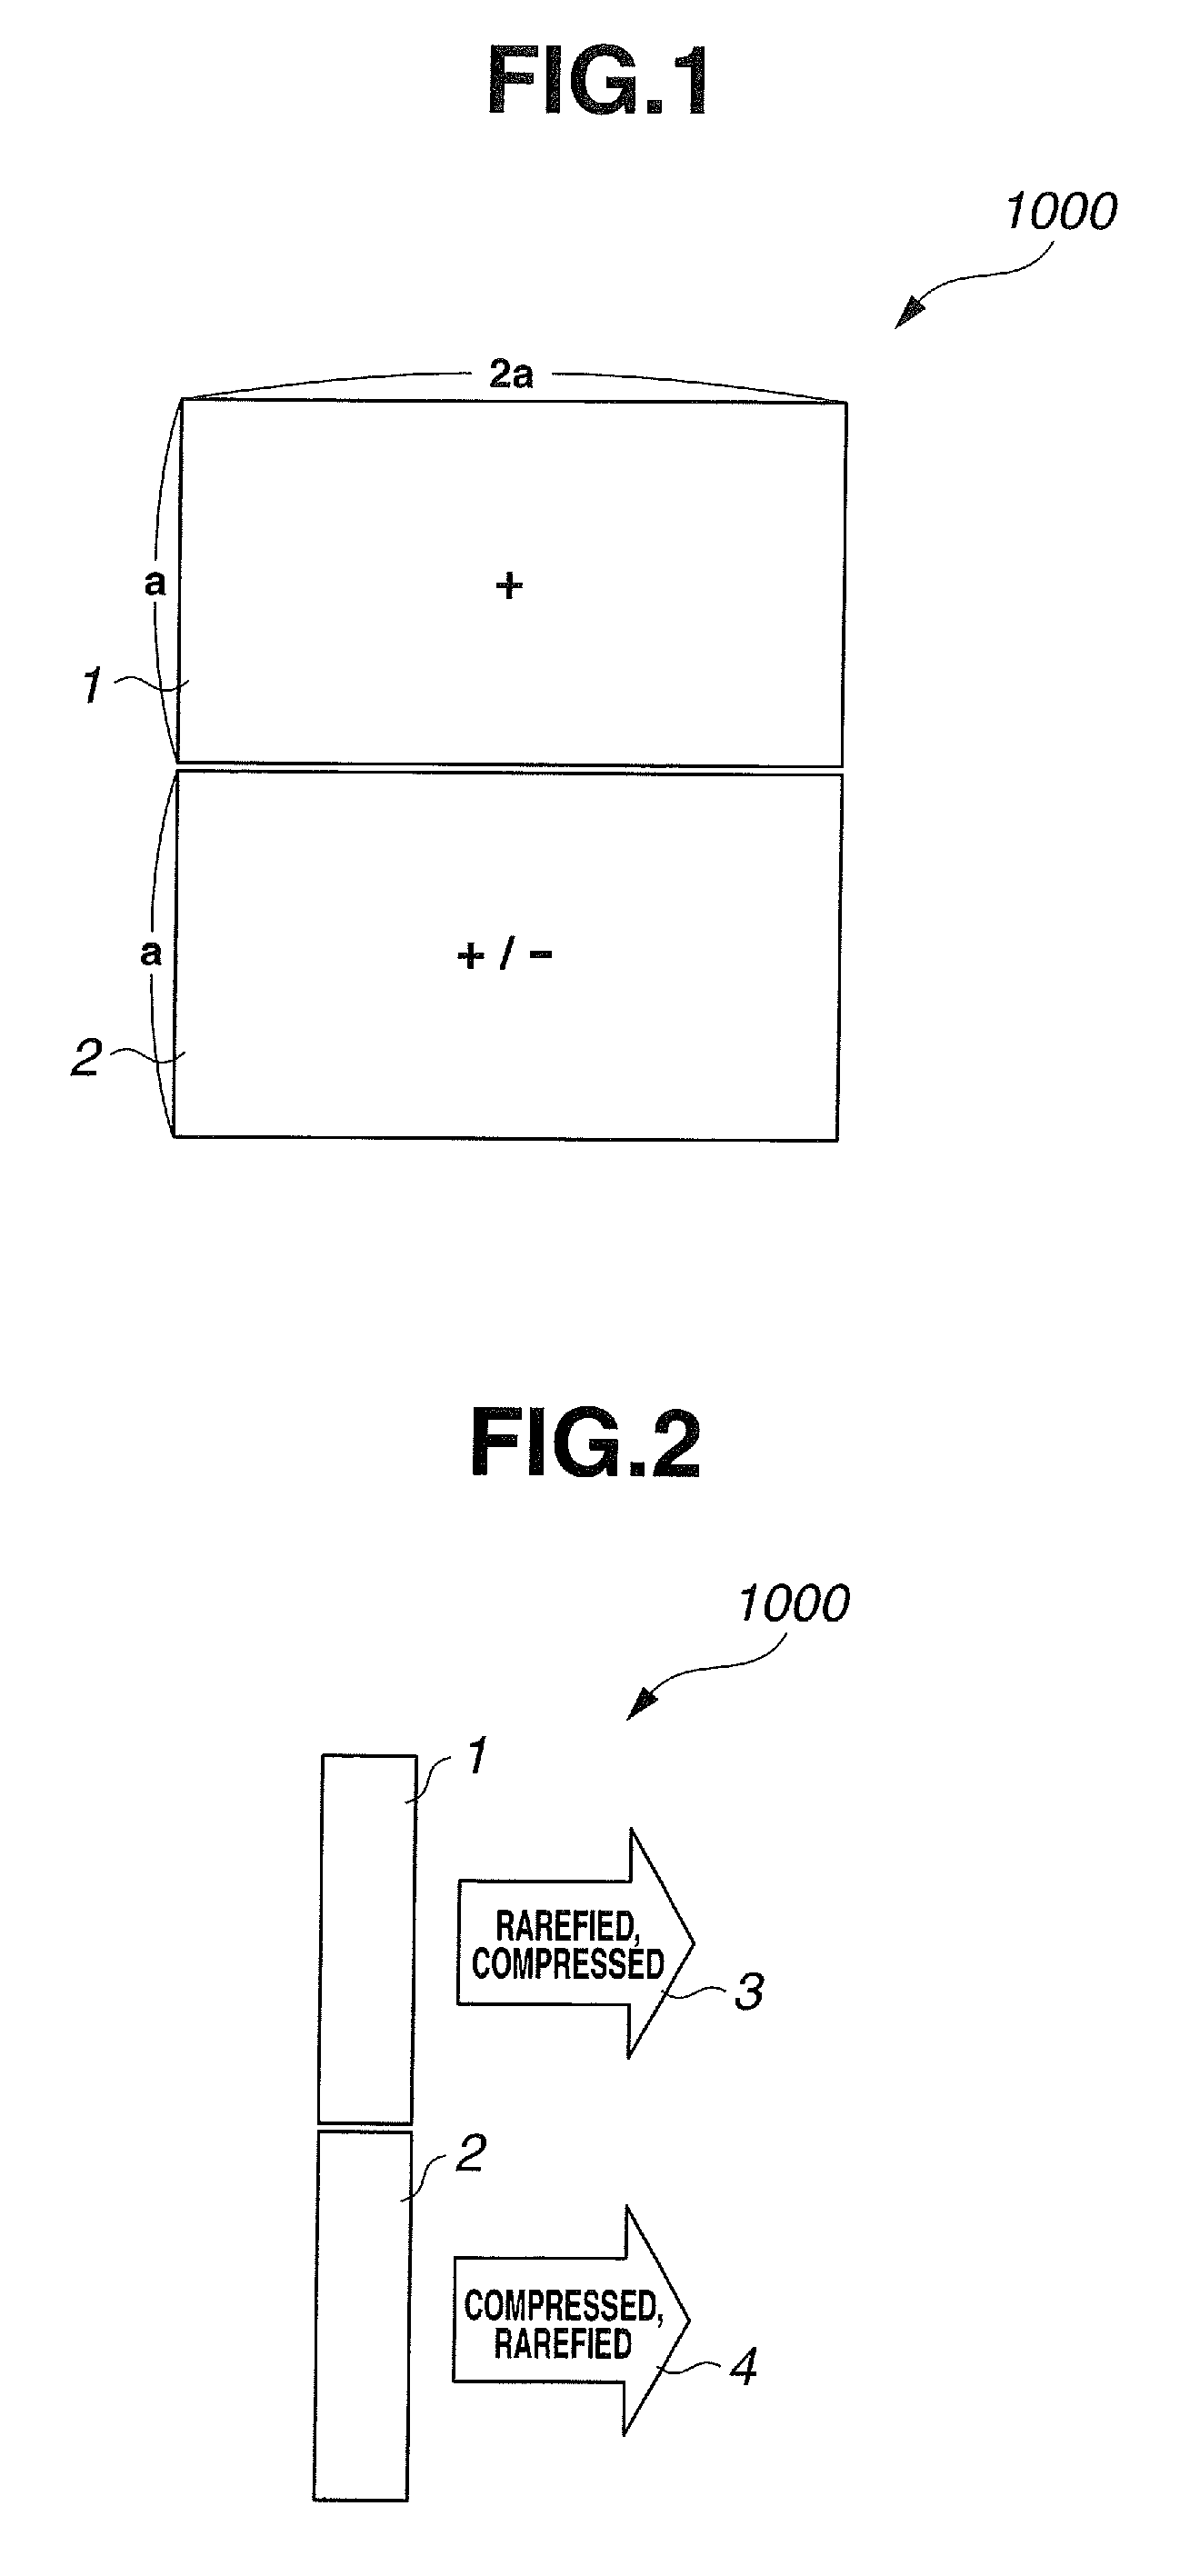 Acoustic transducer and image generation apparatus